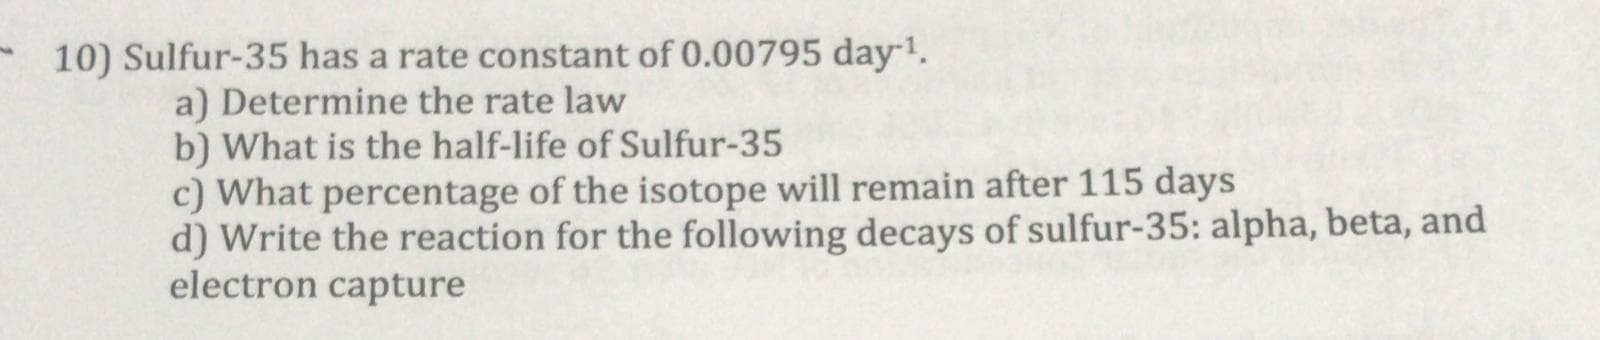 c) What percentage of the isotope will remain after 115 days
lfur 25. alpha beta and
